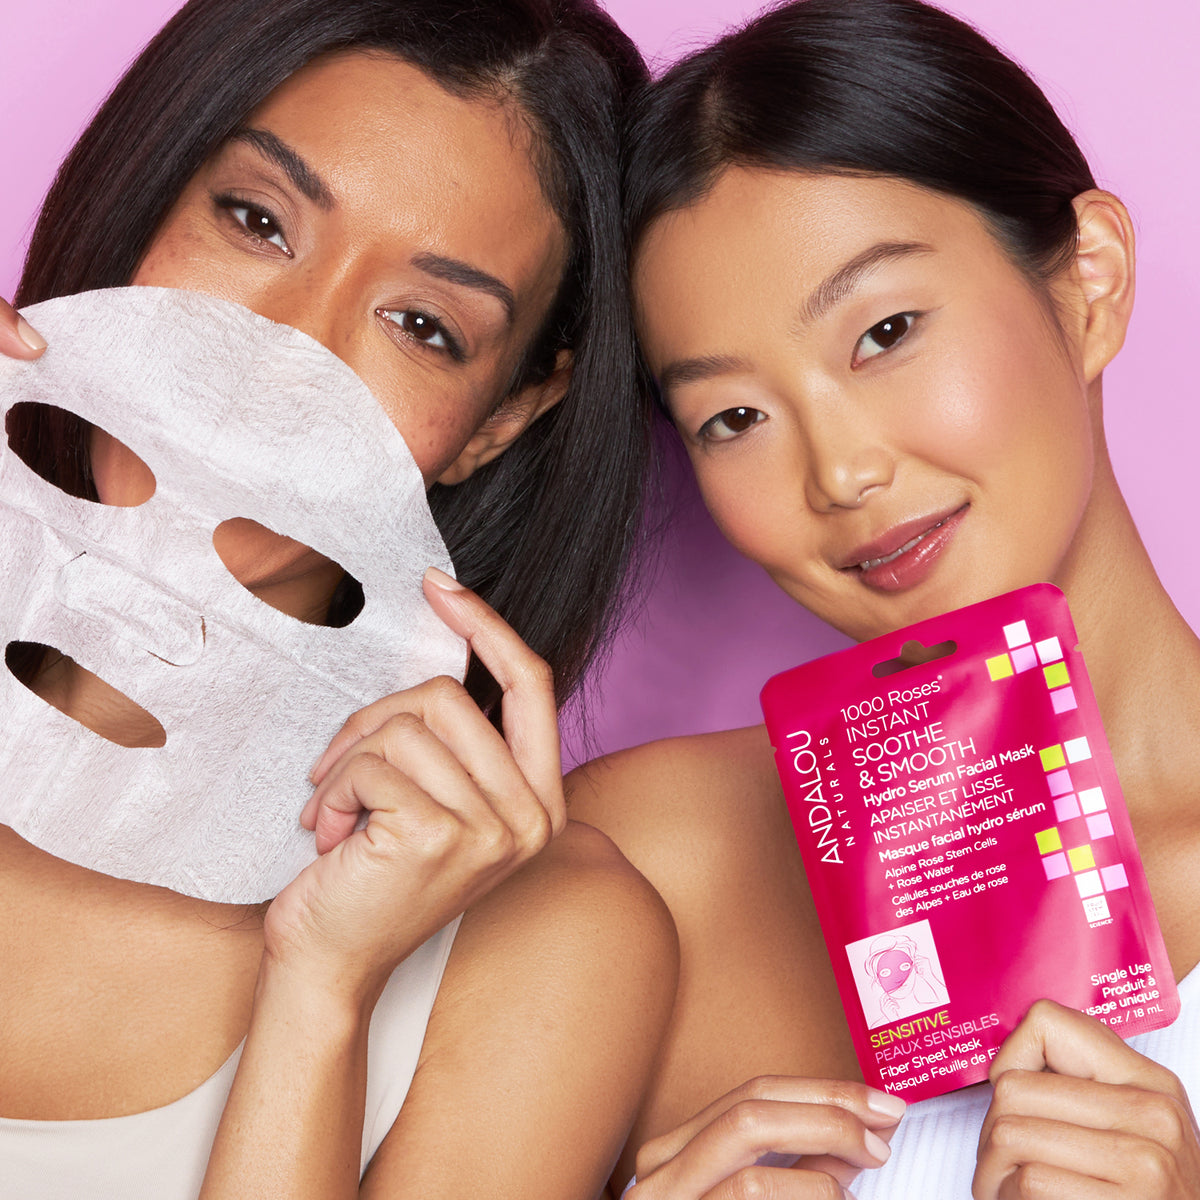 1000 Roses Instant Soothe & Smooth Sheet Mask - Andalou Naturals US